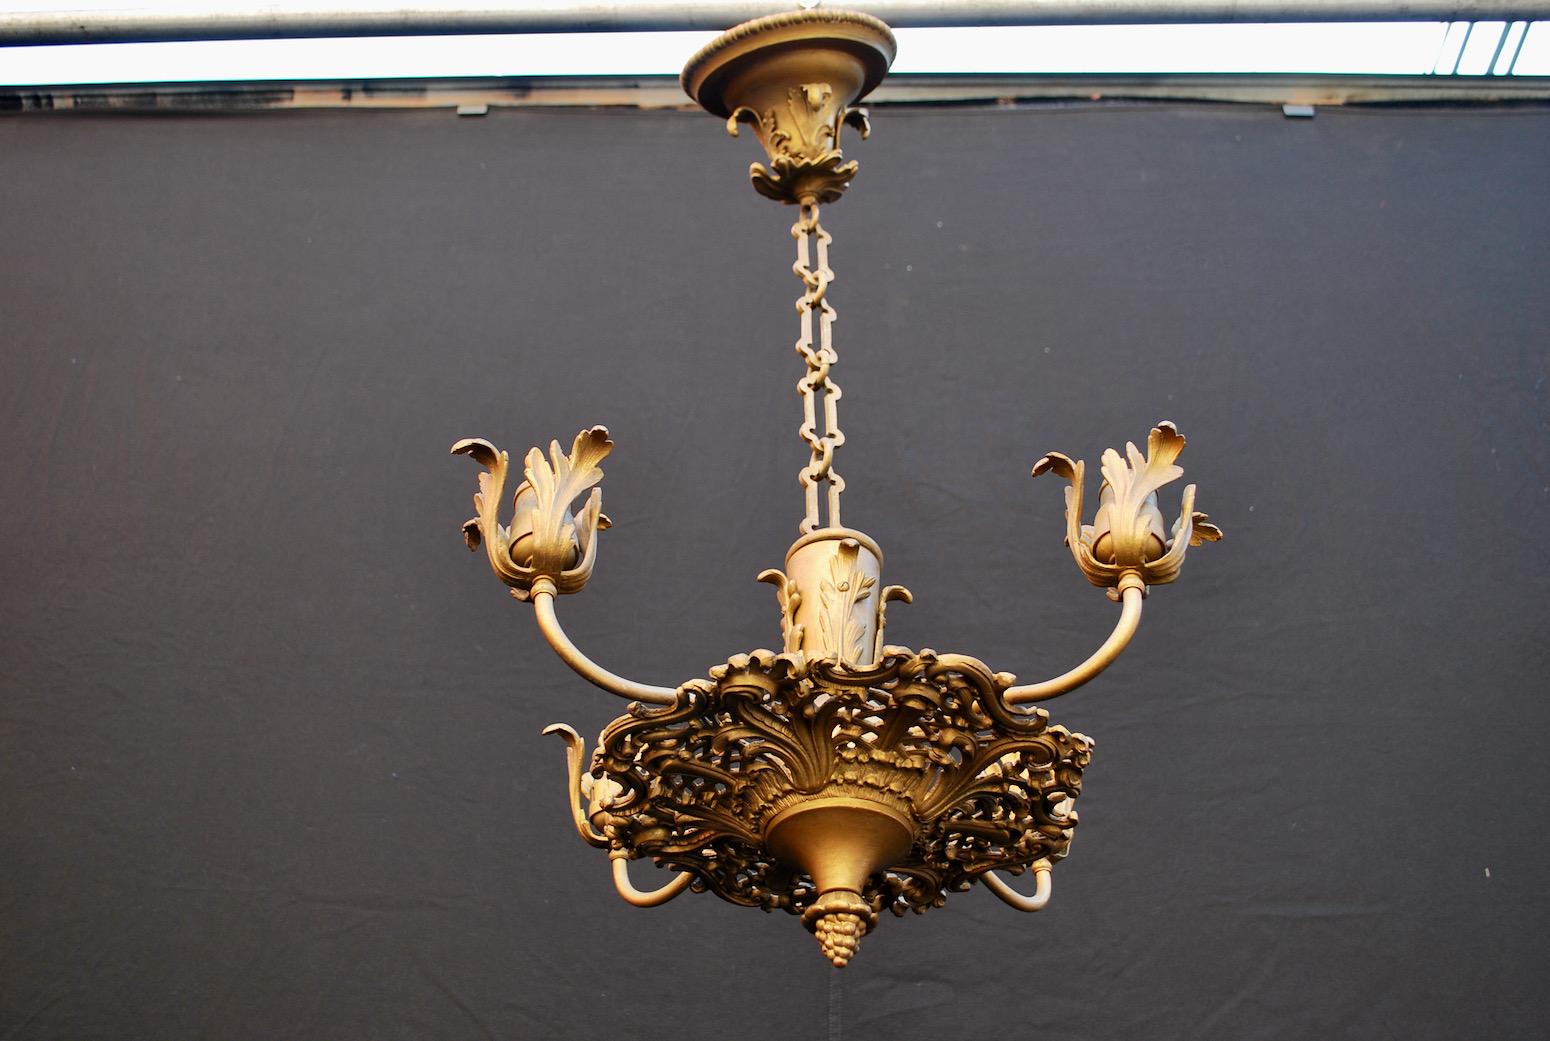 A beautiful 1920s chandelier, I discover that the lights can be up or down, when we rewire the light we can put it the way you desire.
The height can be shorter or higher.